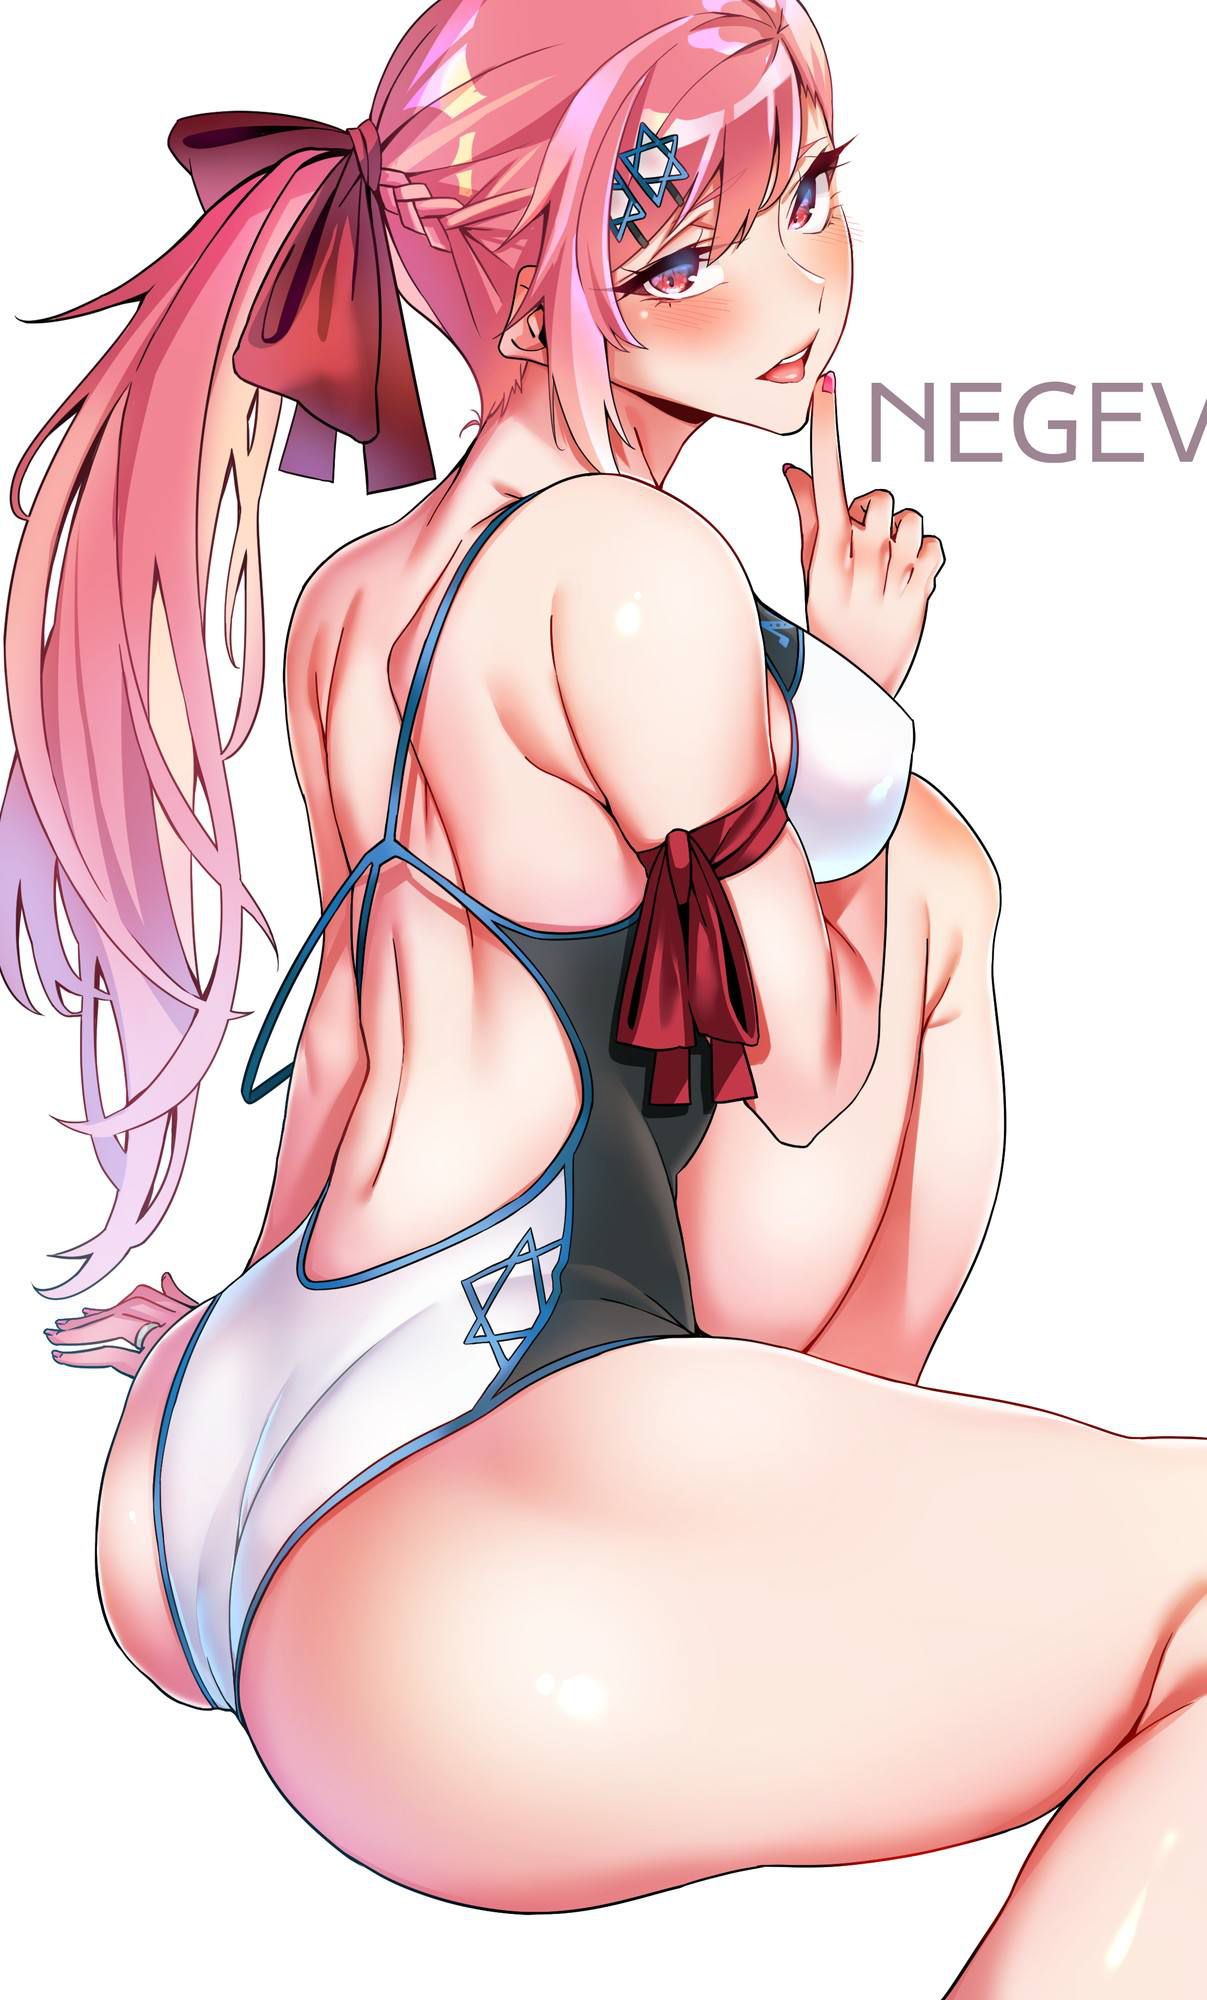 【Dolls Frontline】 Cute erotica image summary that comes out with the negev ehchi 17